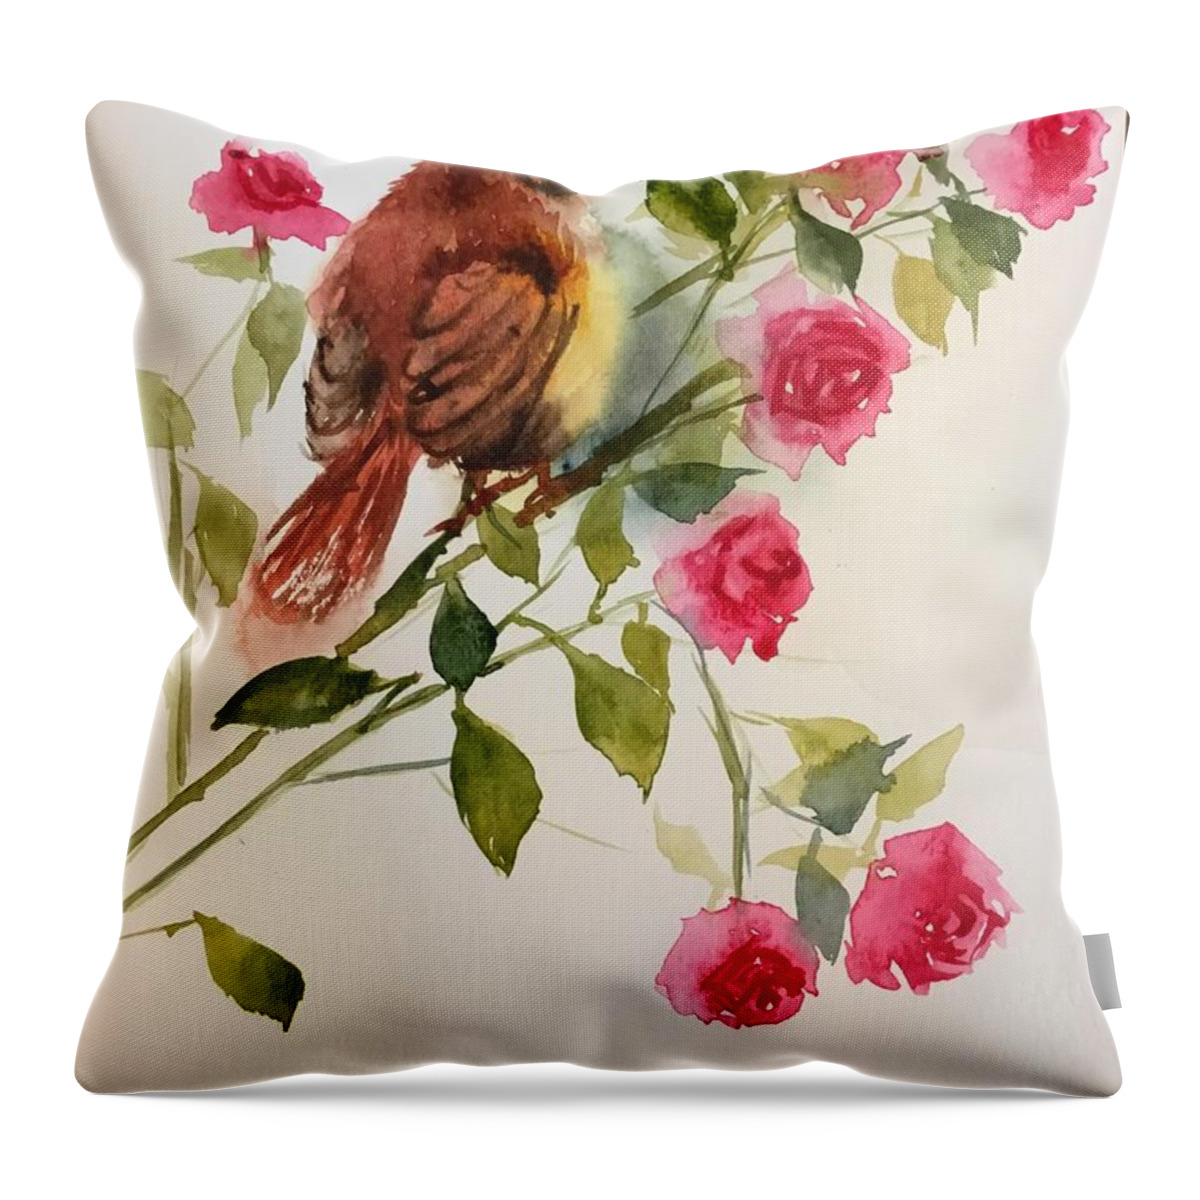 1922019 Throw Pillow featuring the painting 1922019 by Han in Huang wong